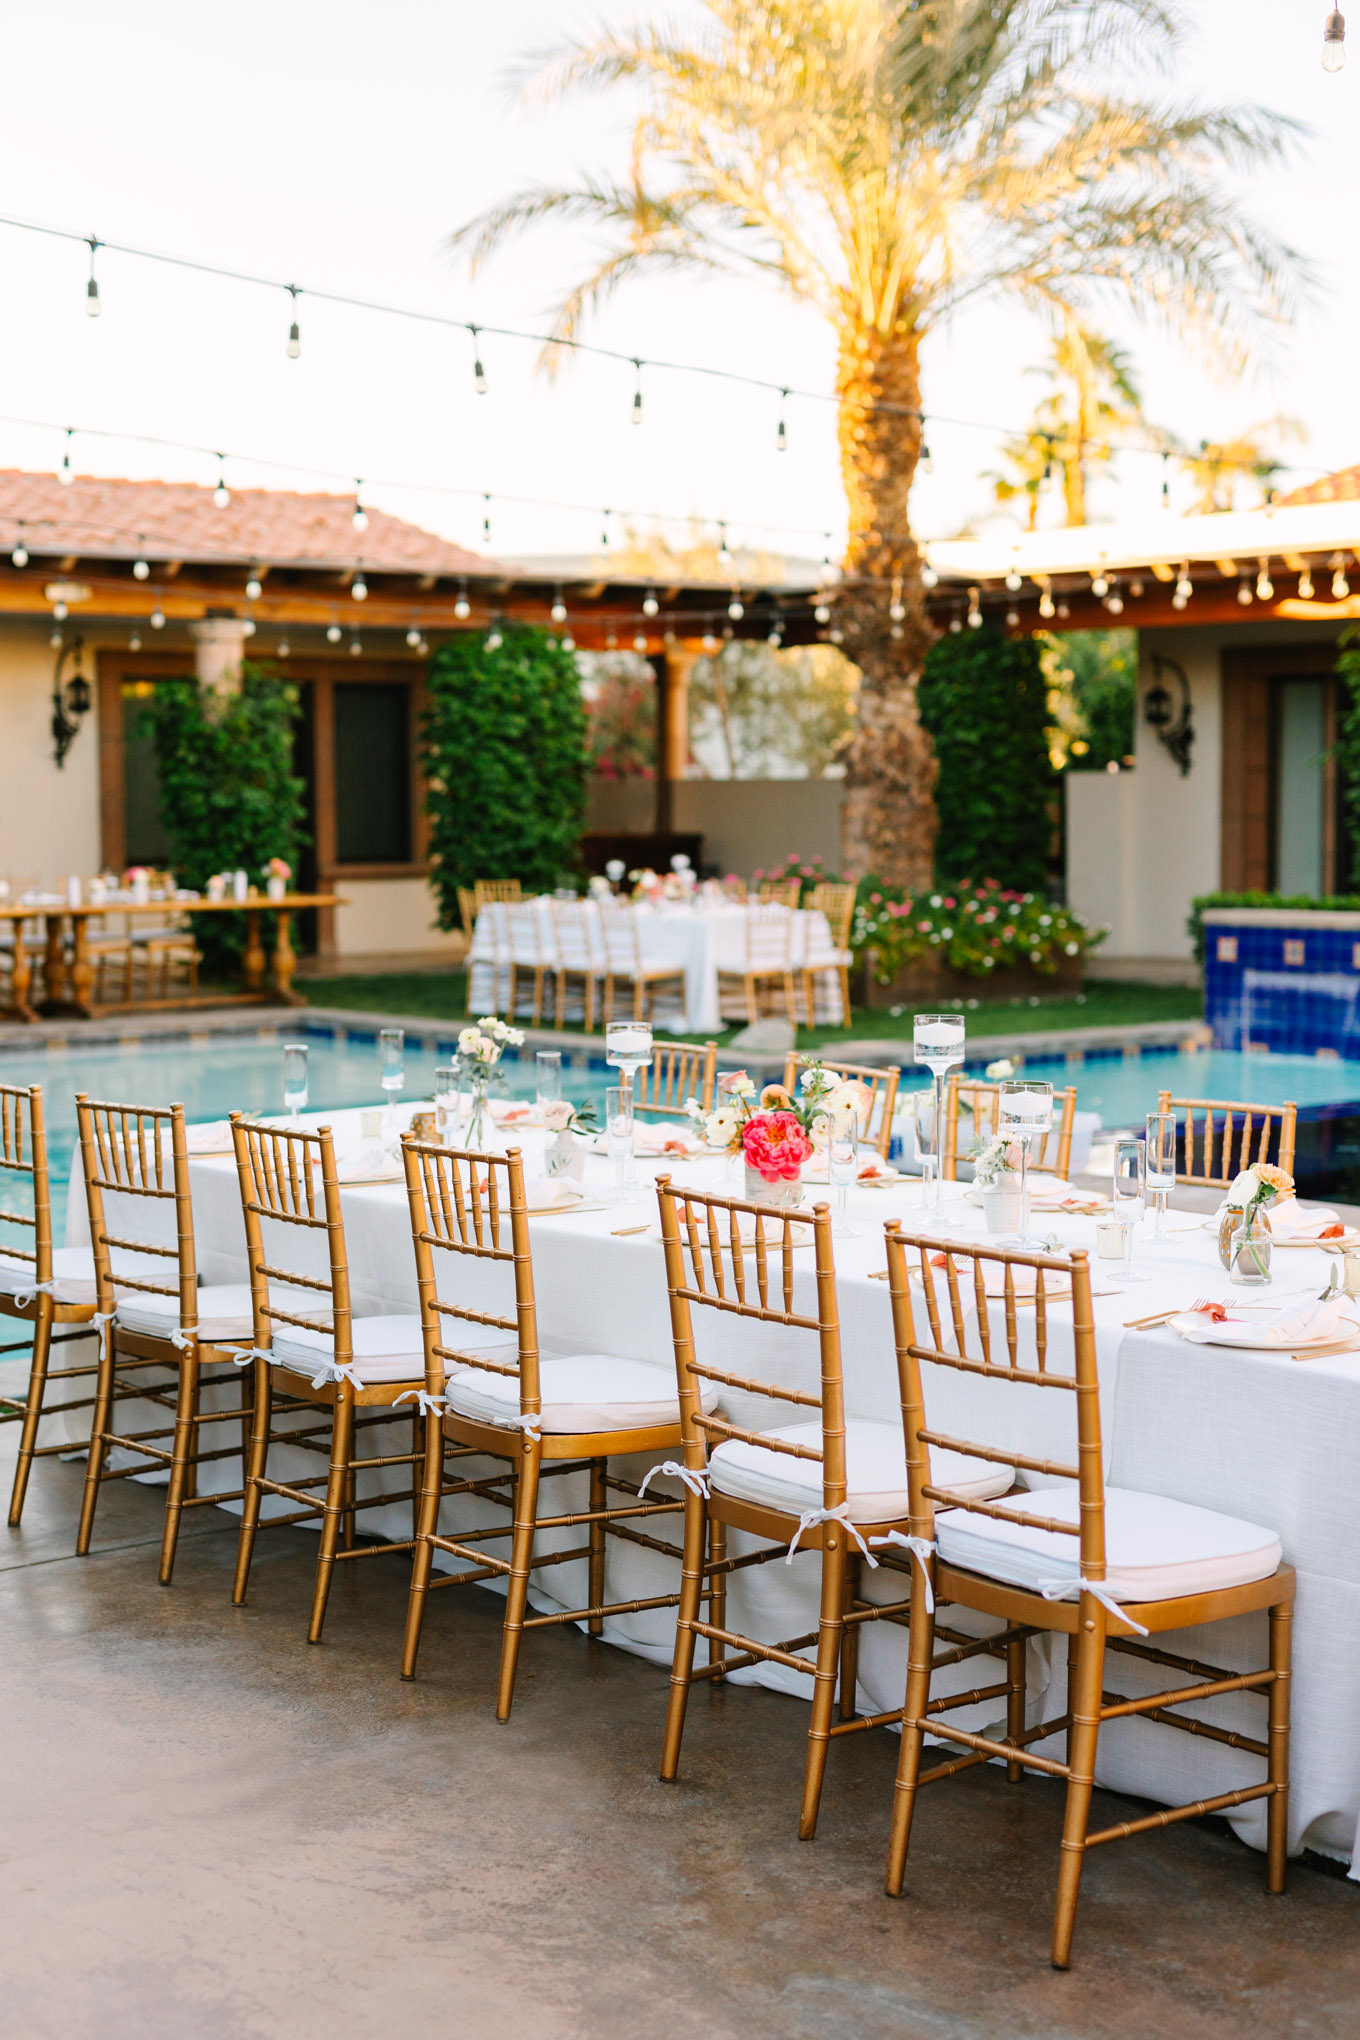 Reception seating | Pink Bougainvillea Estate wedding | Colorful LA wedding photography | #bougainvilleaestate #palmspringswedding #palmspringsweddingvenue #palmspringsphotographer Source: Mary Costa Photography | Los Angeles